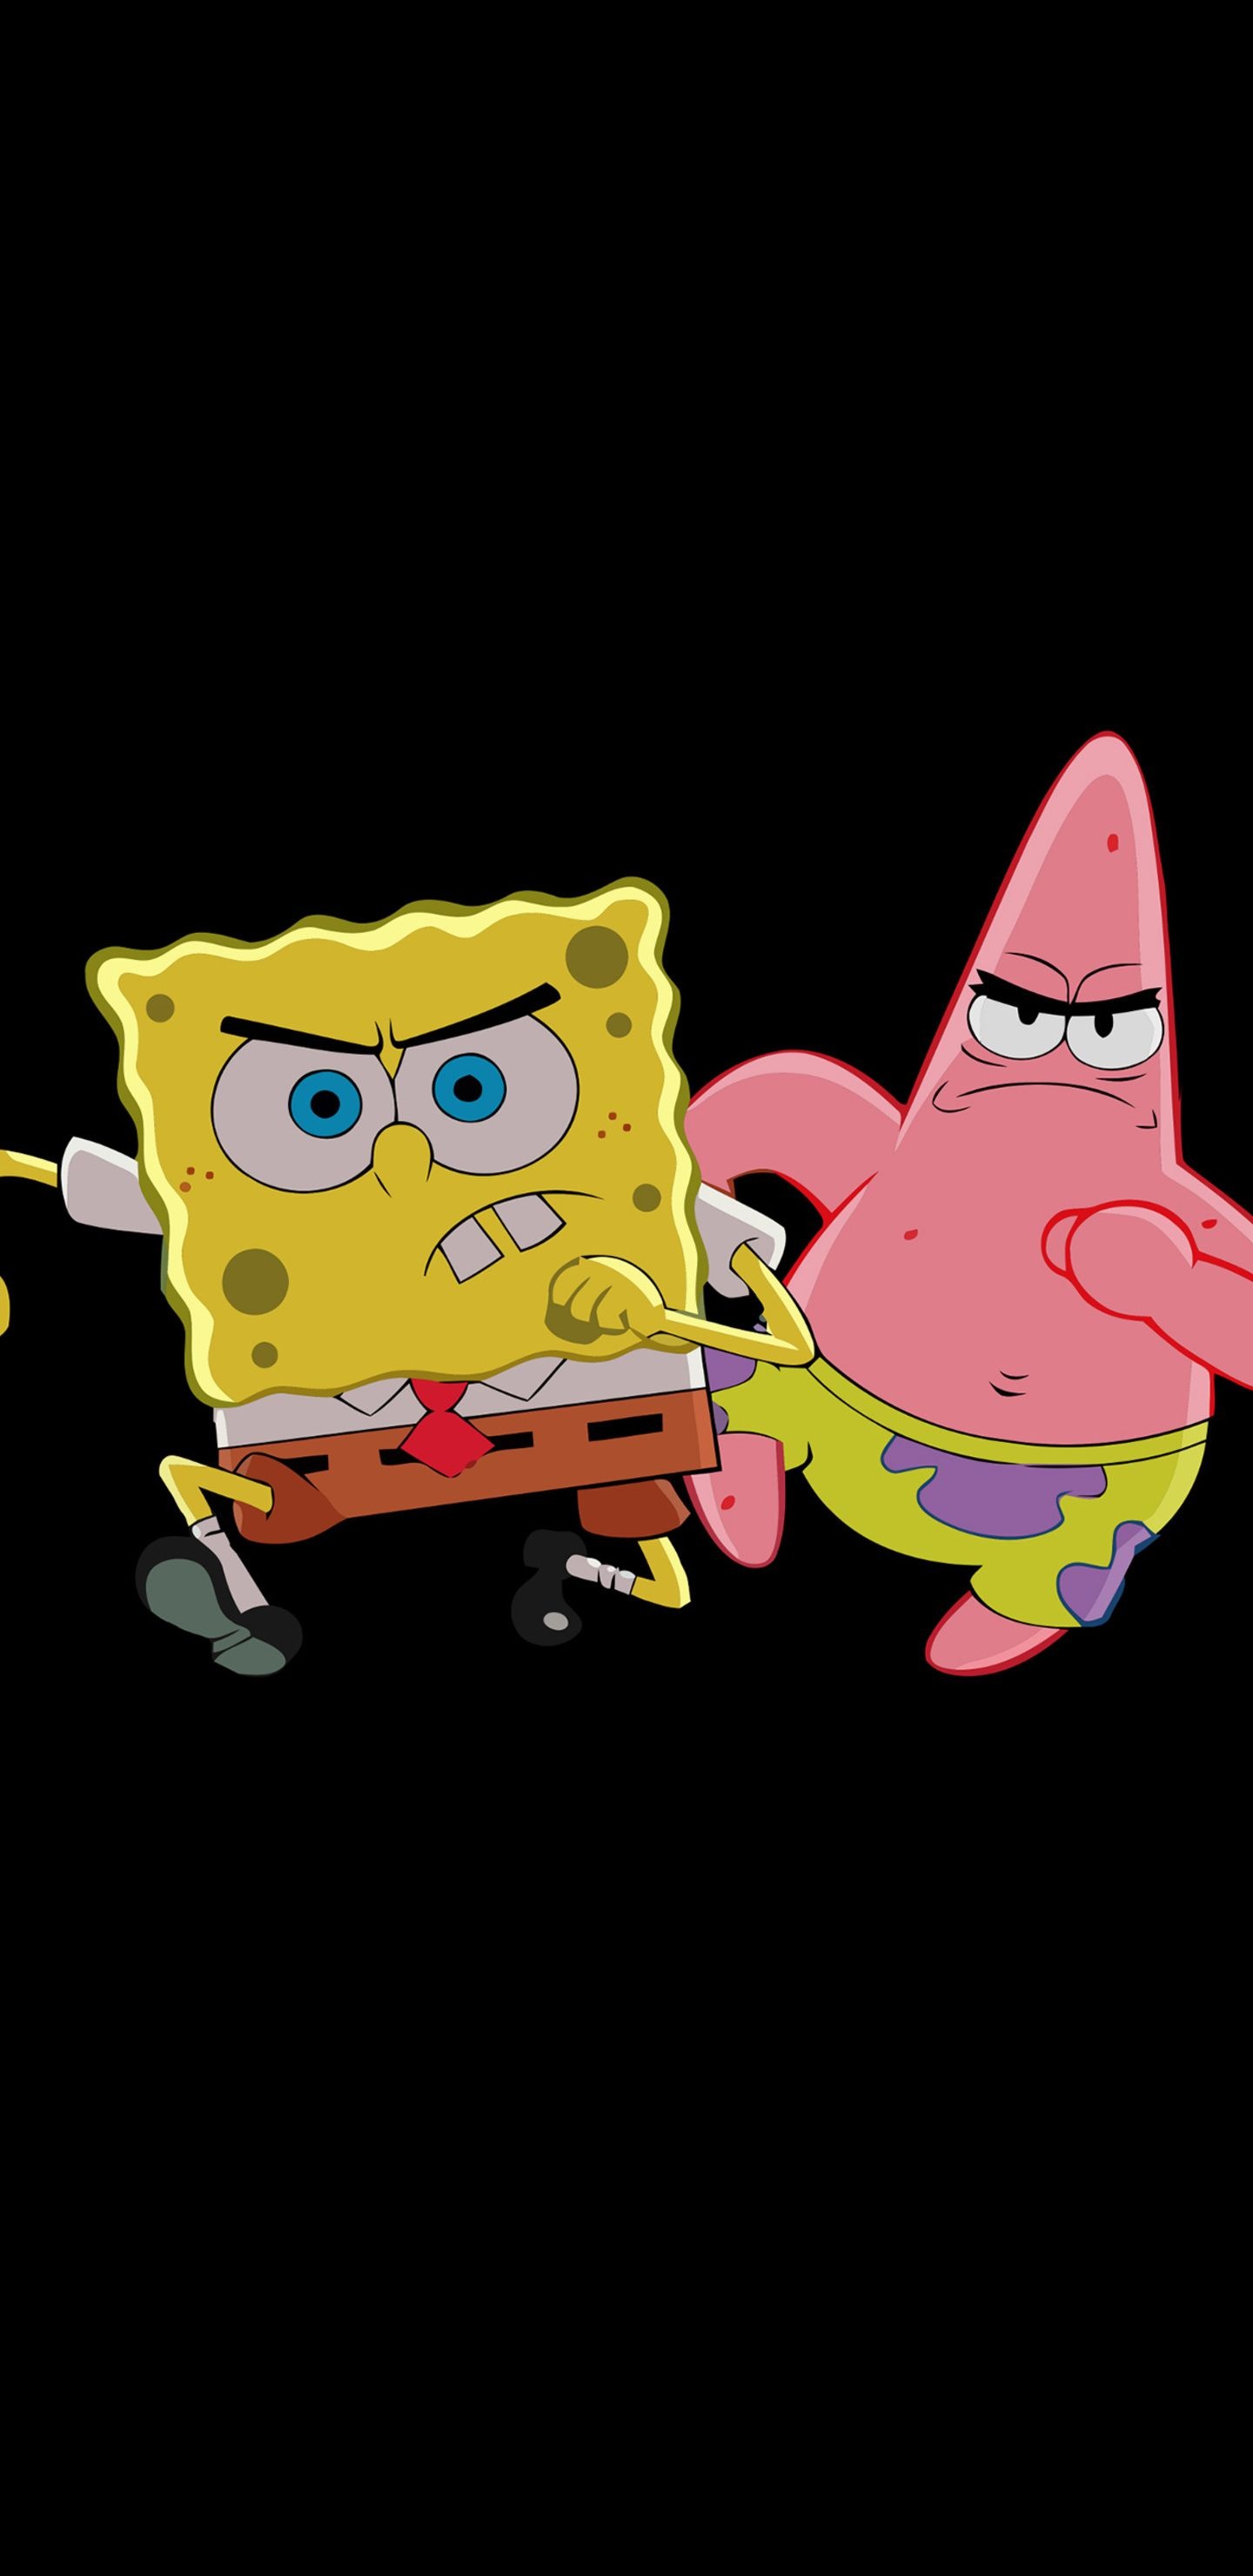 Patrick wallpapers, Animation, 1440x2960 HD Handy